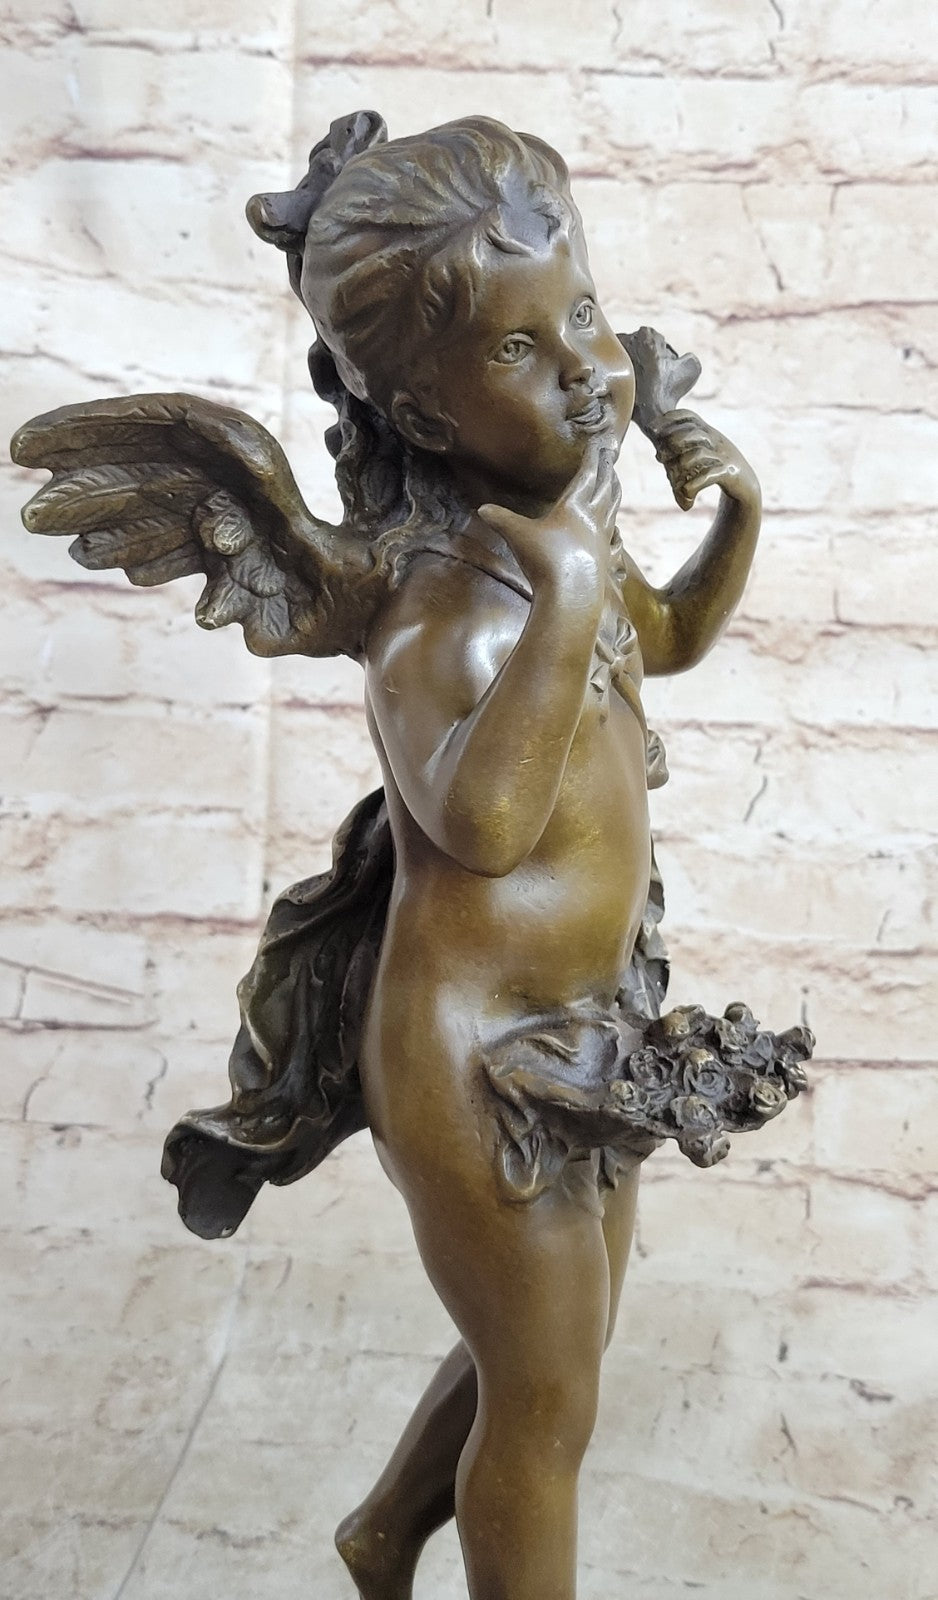 Signed Angel Religious Bronze Sculpture Mythical Statue Figurine Figure Home Deco